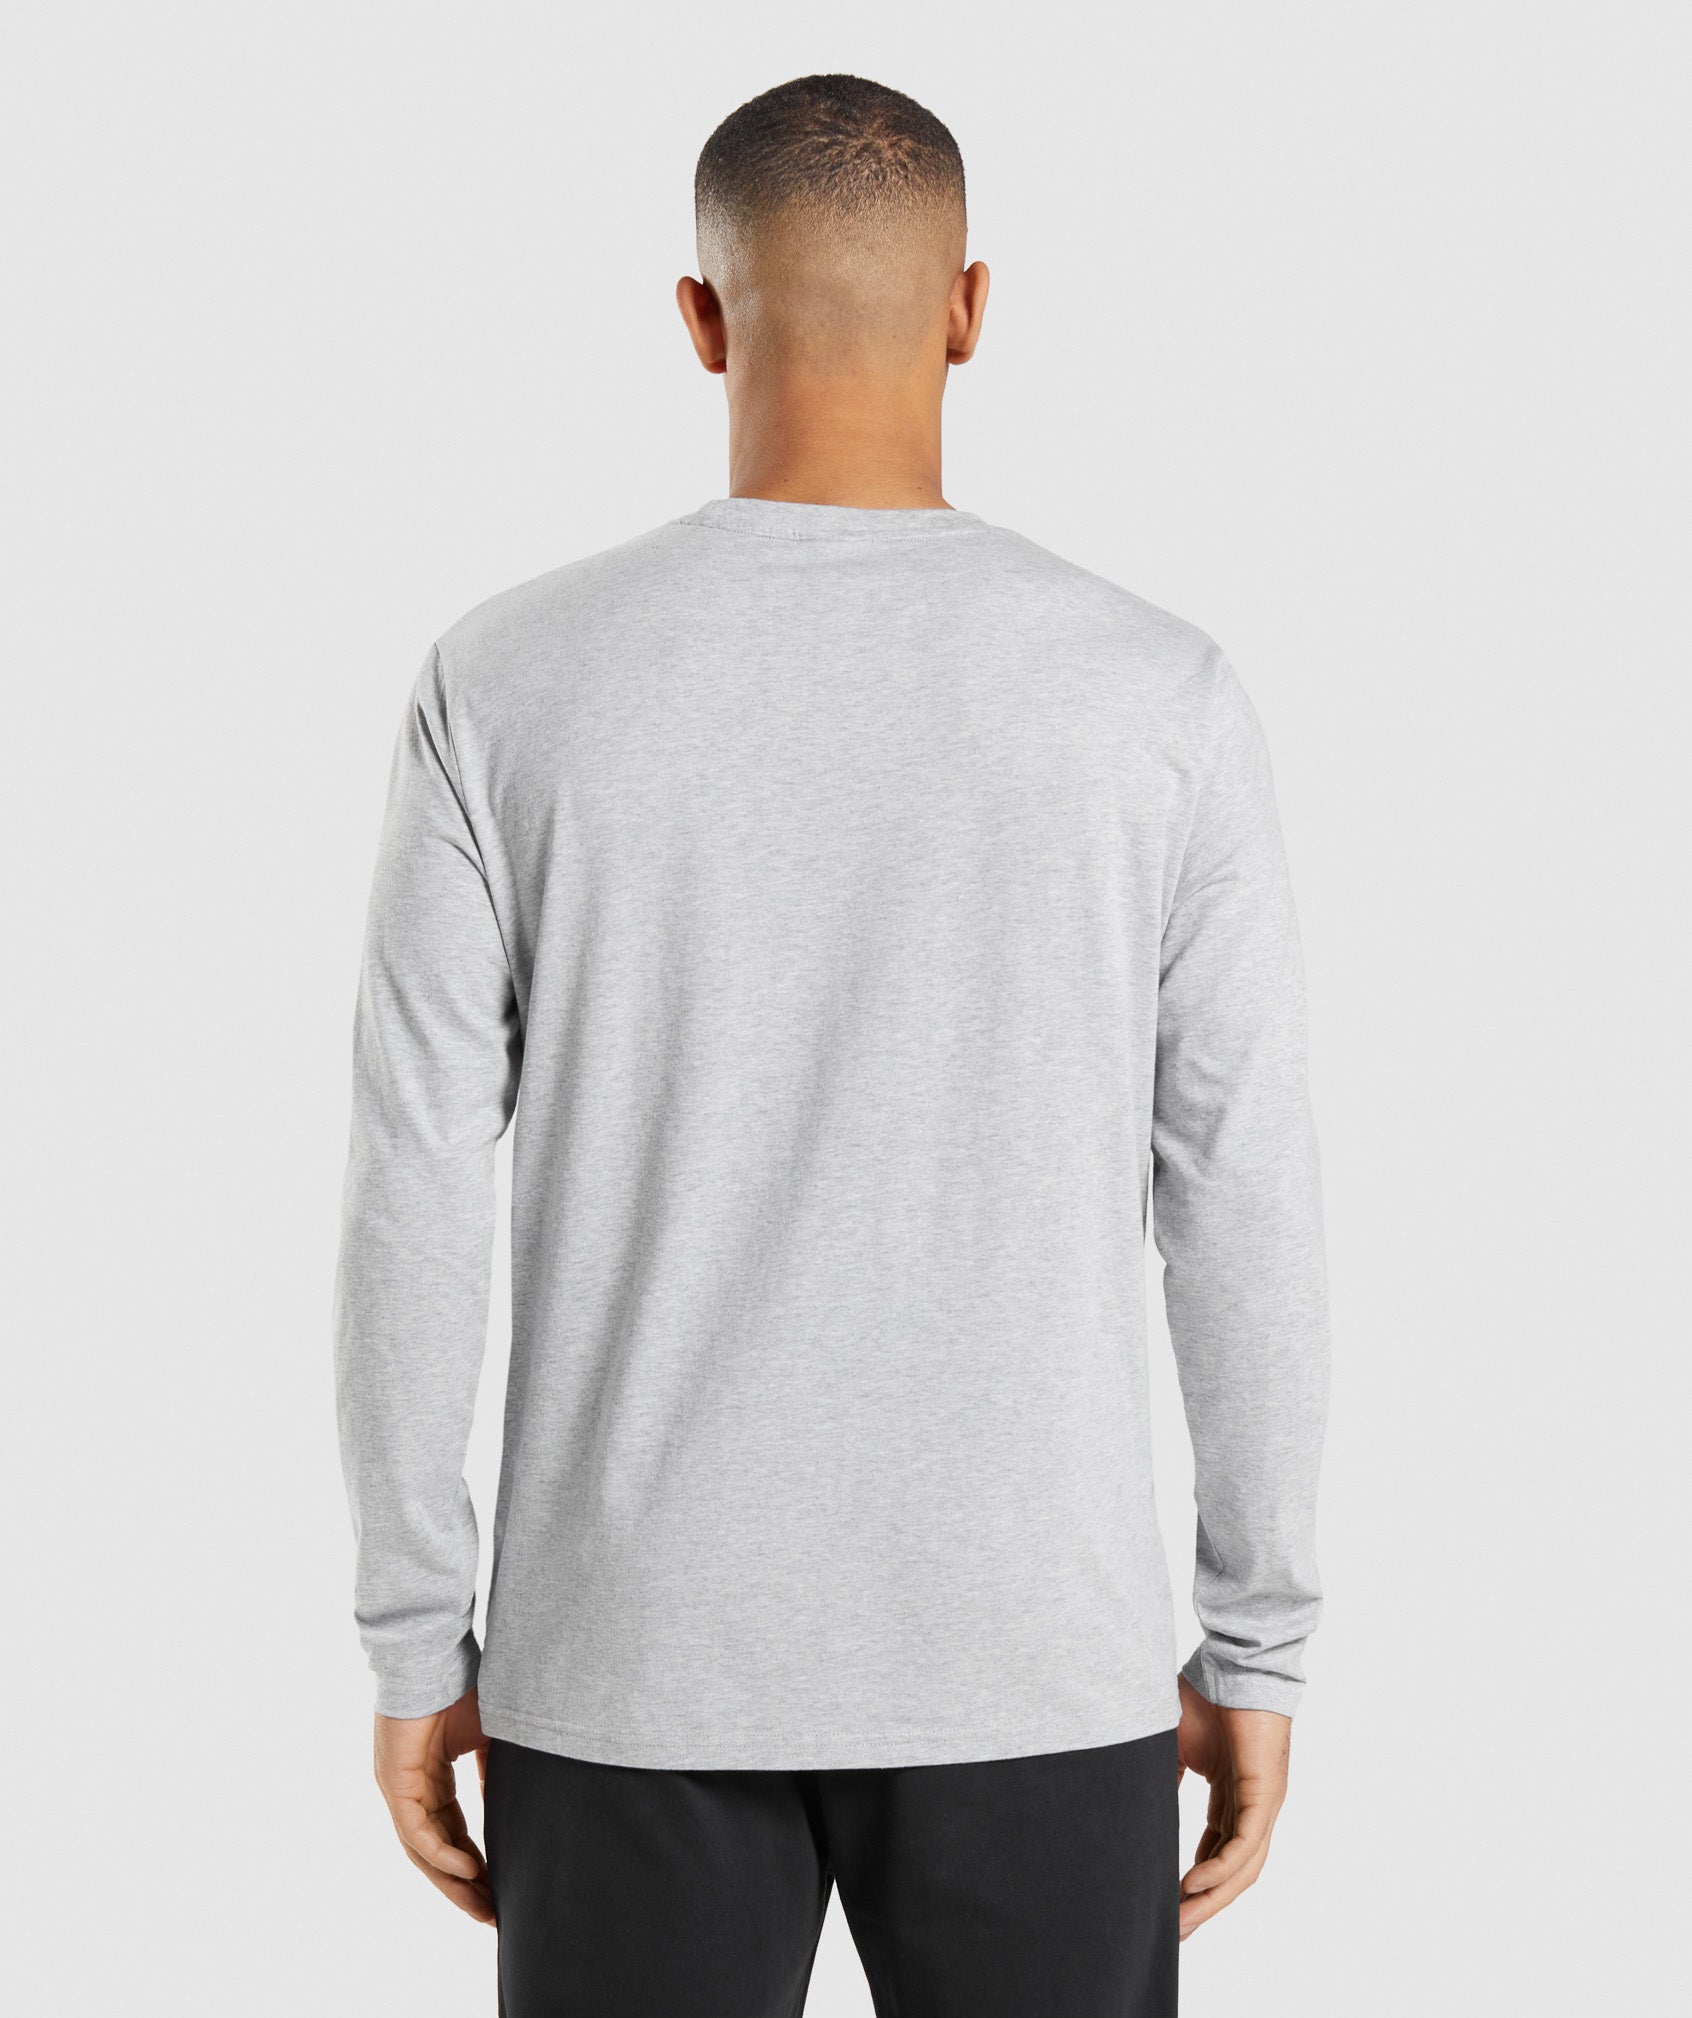 Crest Long Sleeve T-Shirt in Light Grey Core Marl - view 2